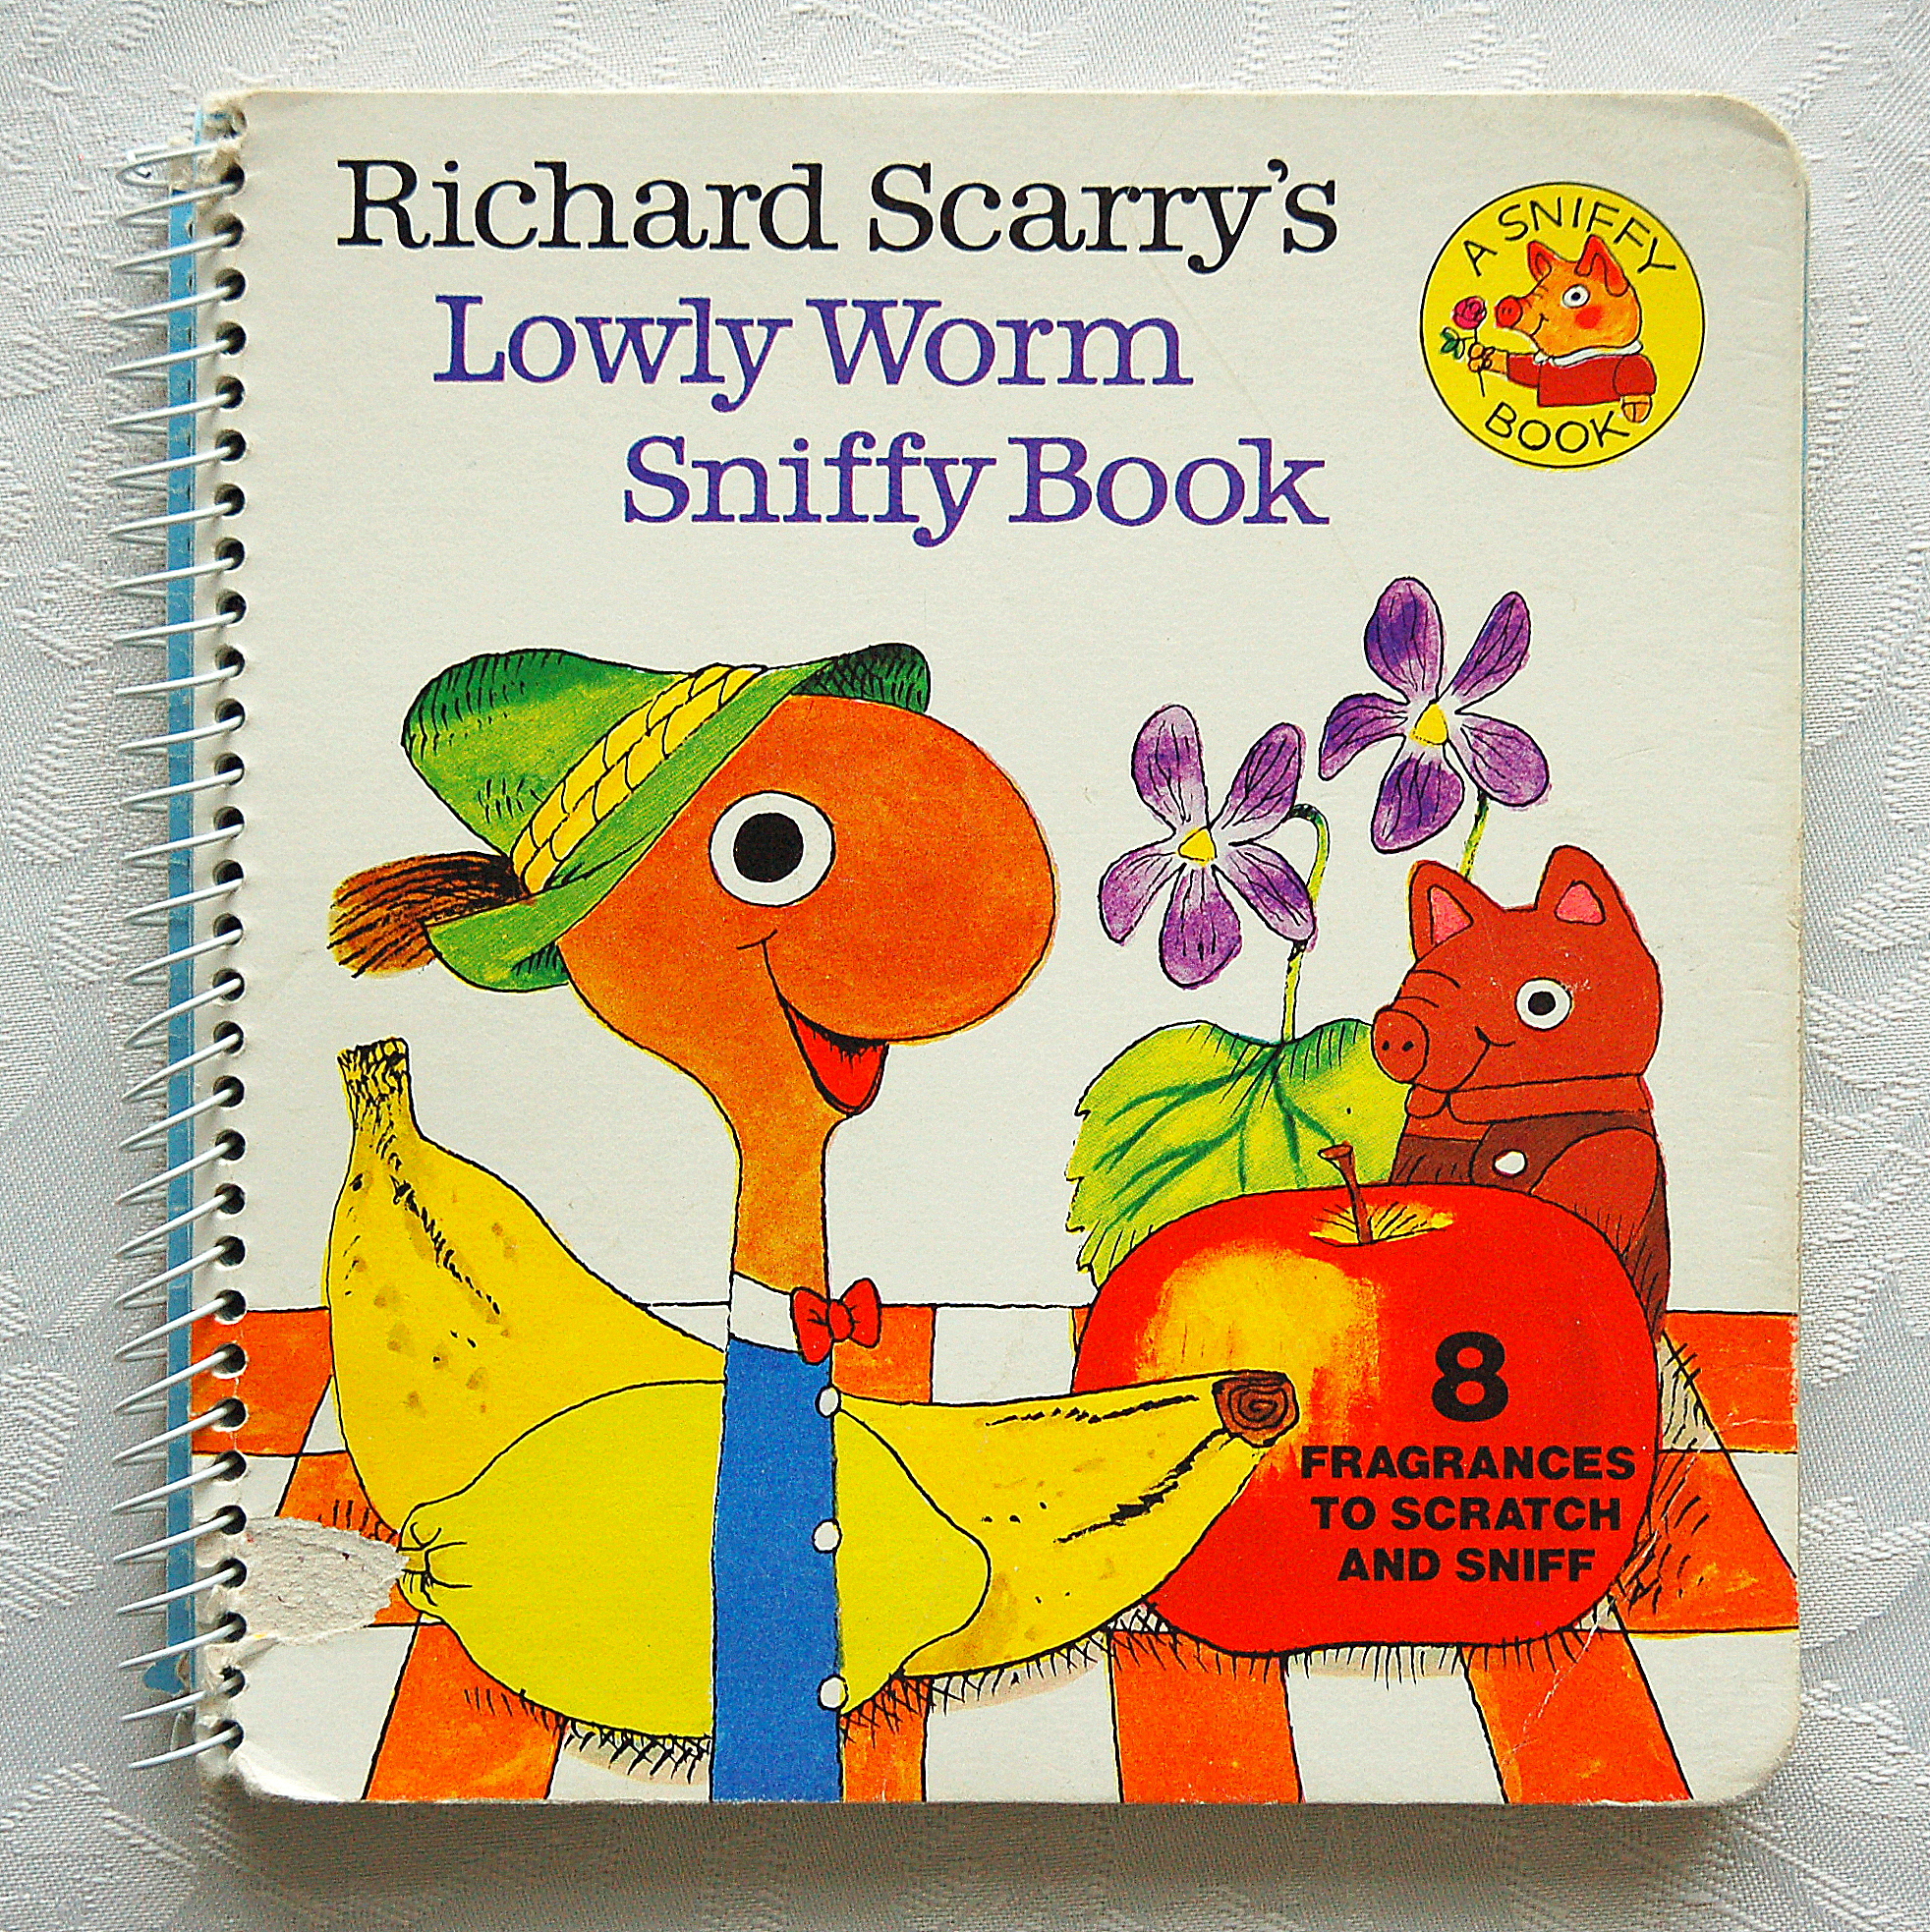 Whatever happened to scratch and sniff books?